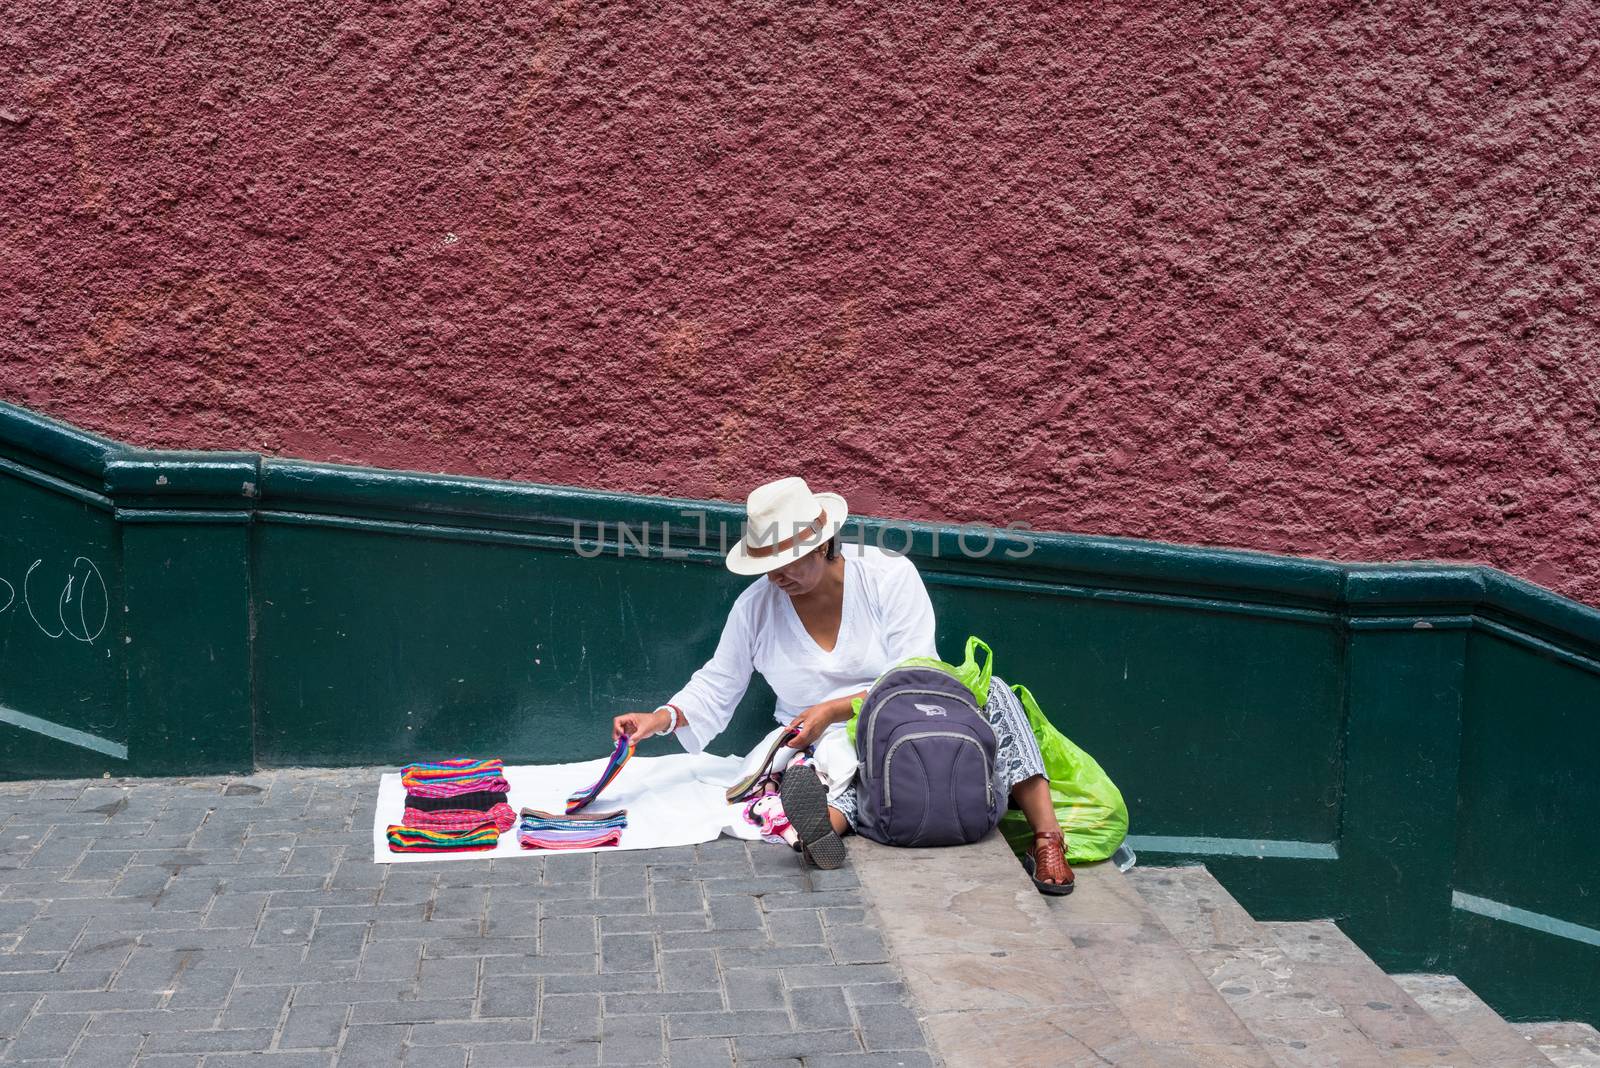 Lima, Peru -- April 13, 2018. A street vendor displays scarves for sale on stairs near the Bridge if Sighs. Editorial use only.